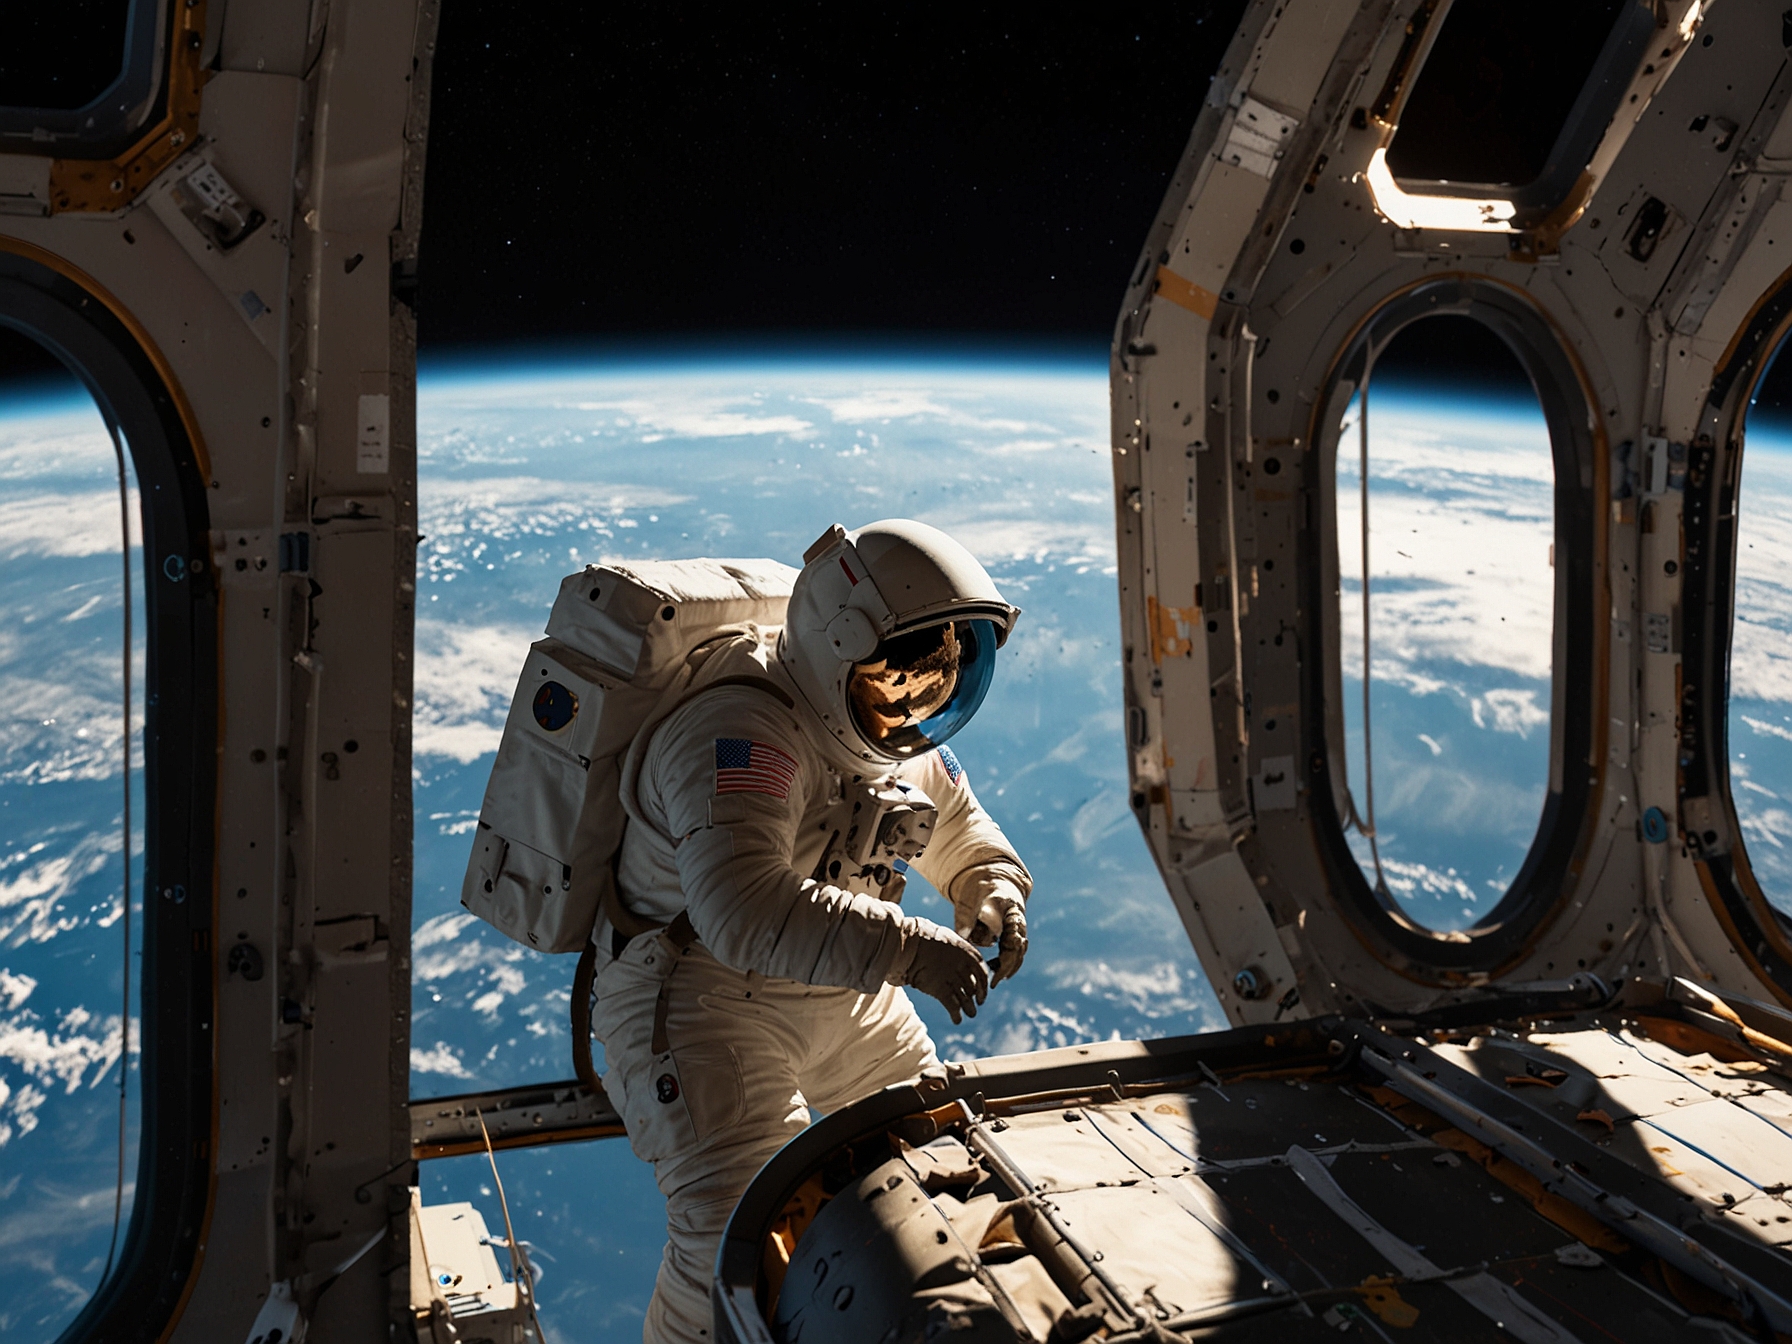 An engineer examines an outdated NASA spacesuit on the International Space Station (ISS), highlighting the necessity for new, advanced suits for upcoming missions like Artemis.